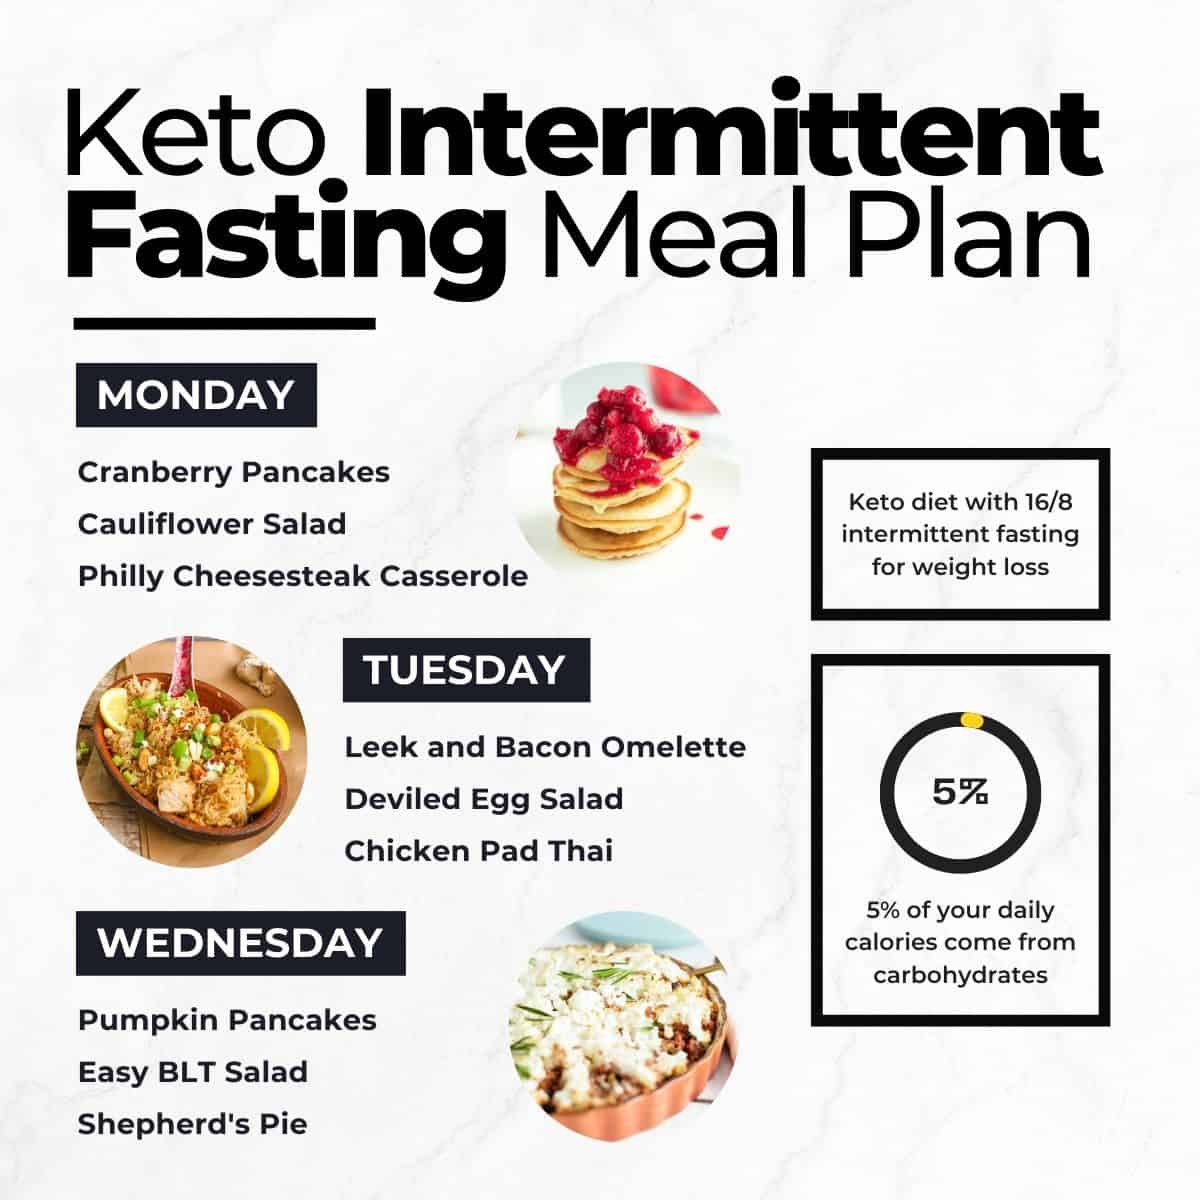 Free Keto Diet Plan - 3 Day Quick Start Menu with Recipes & FAQs